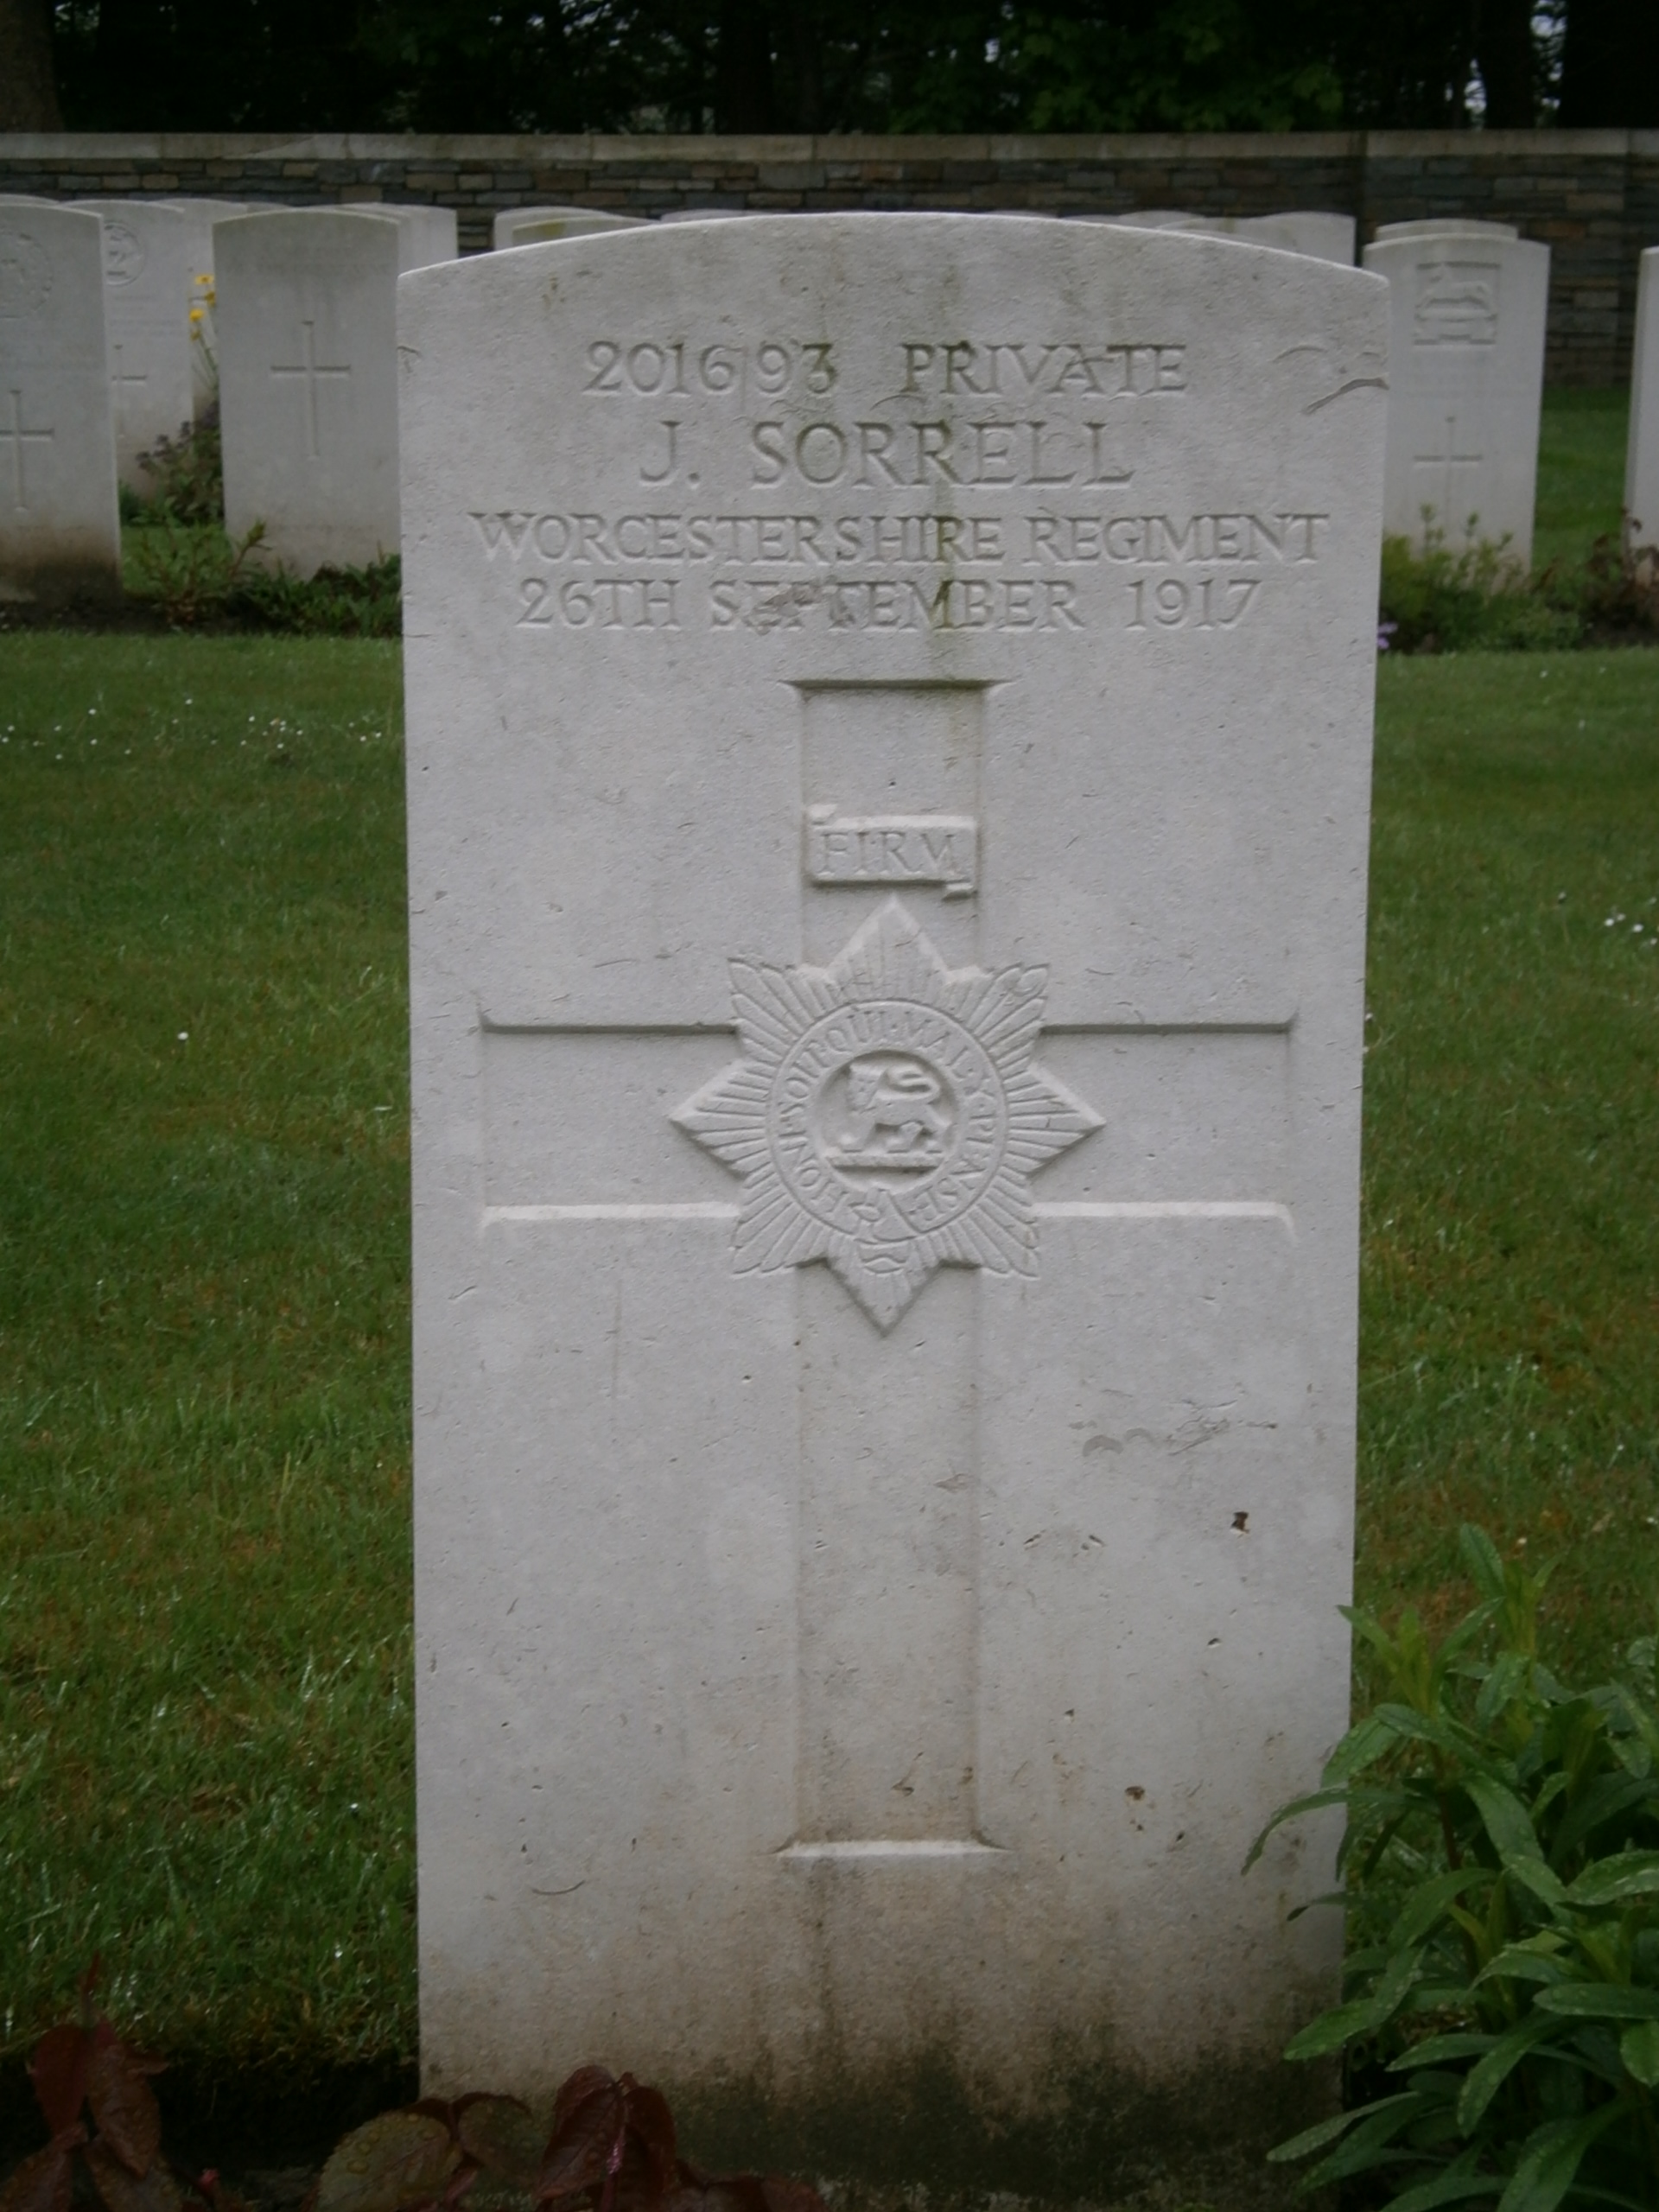 The grave of John Sorrell at Buttes New British Cemetery